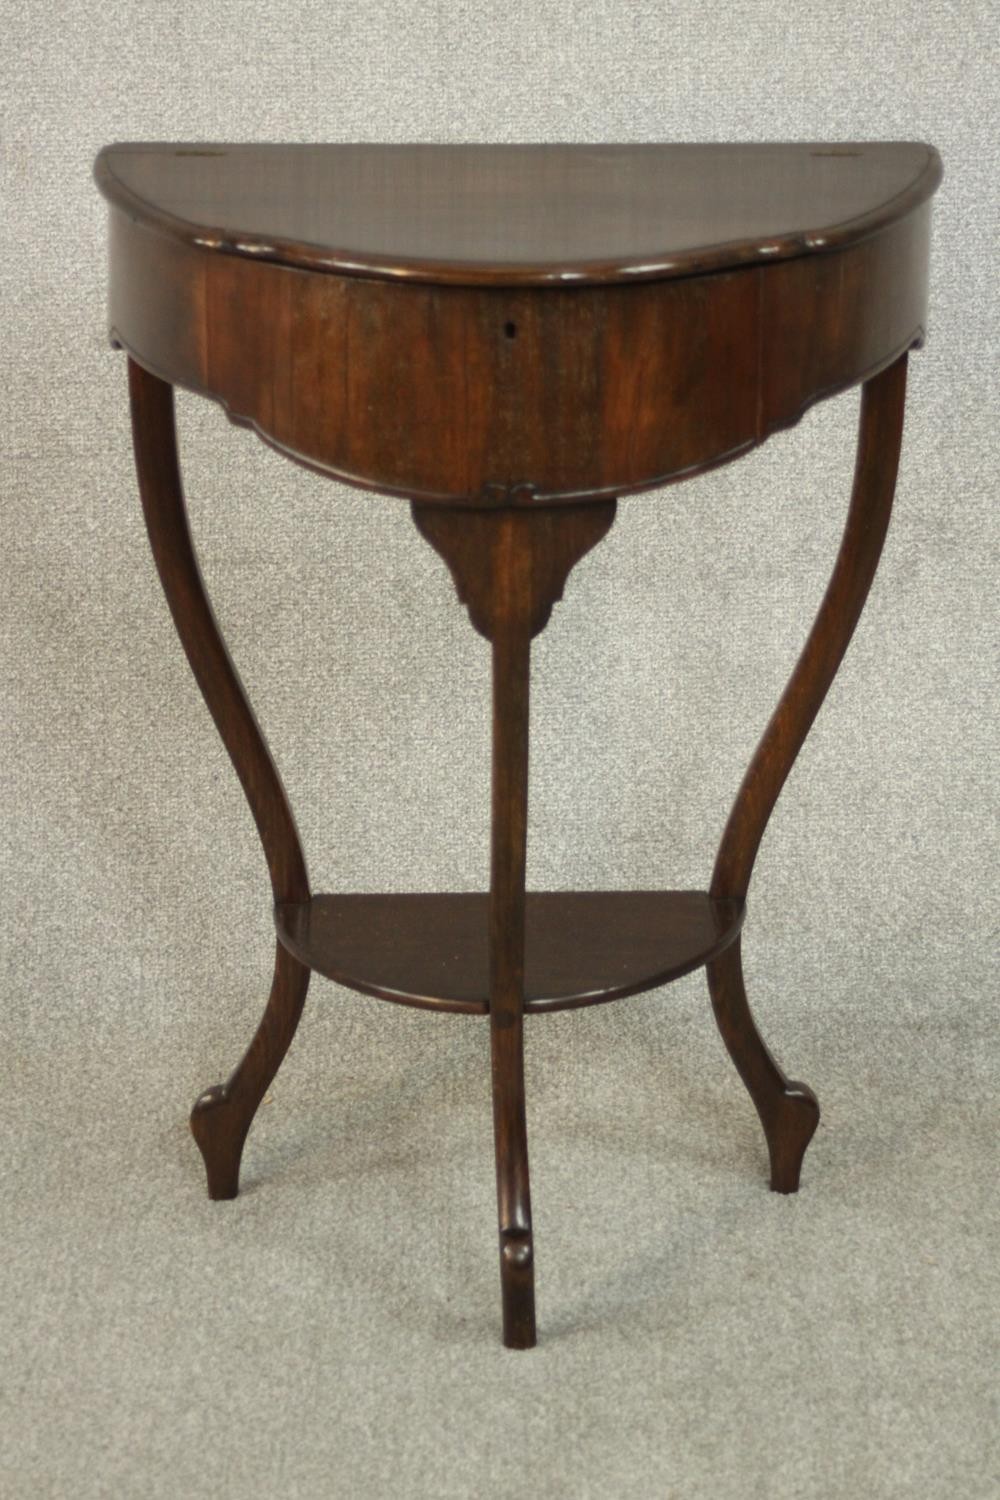 An early 20th century mahogany demi lune side table, with a foldover top opening to reveal a